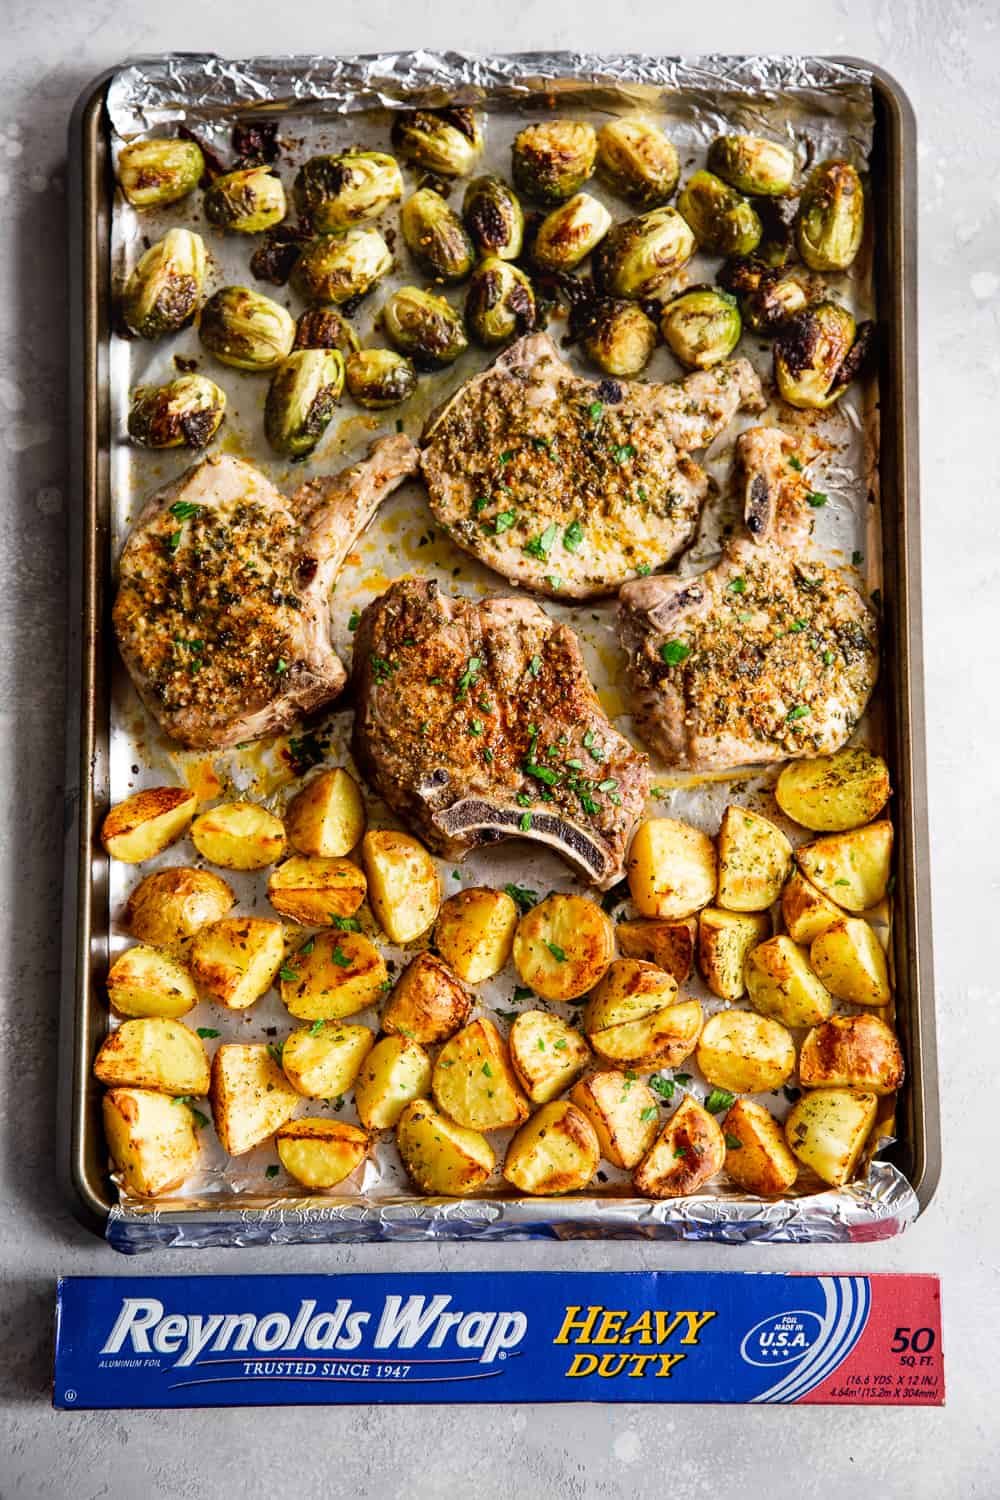 Sheet Pan Ranch Pork Chops with Potatoes and Brussels Sprouts pic pic